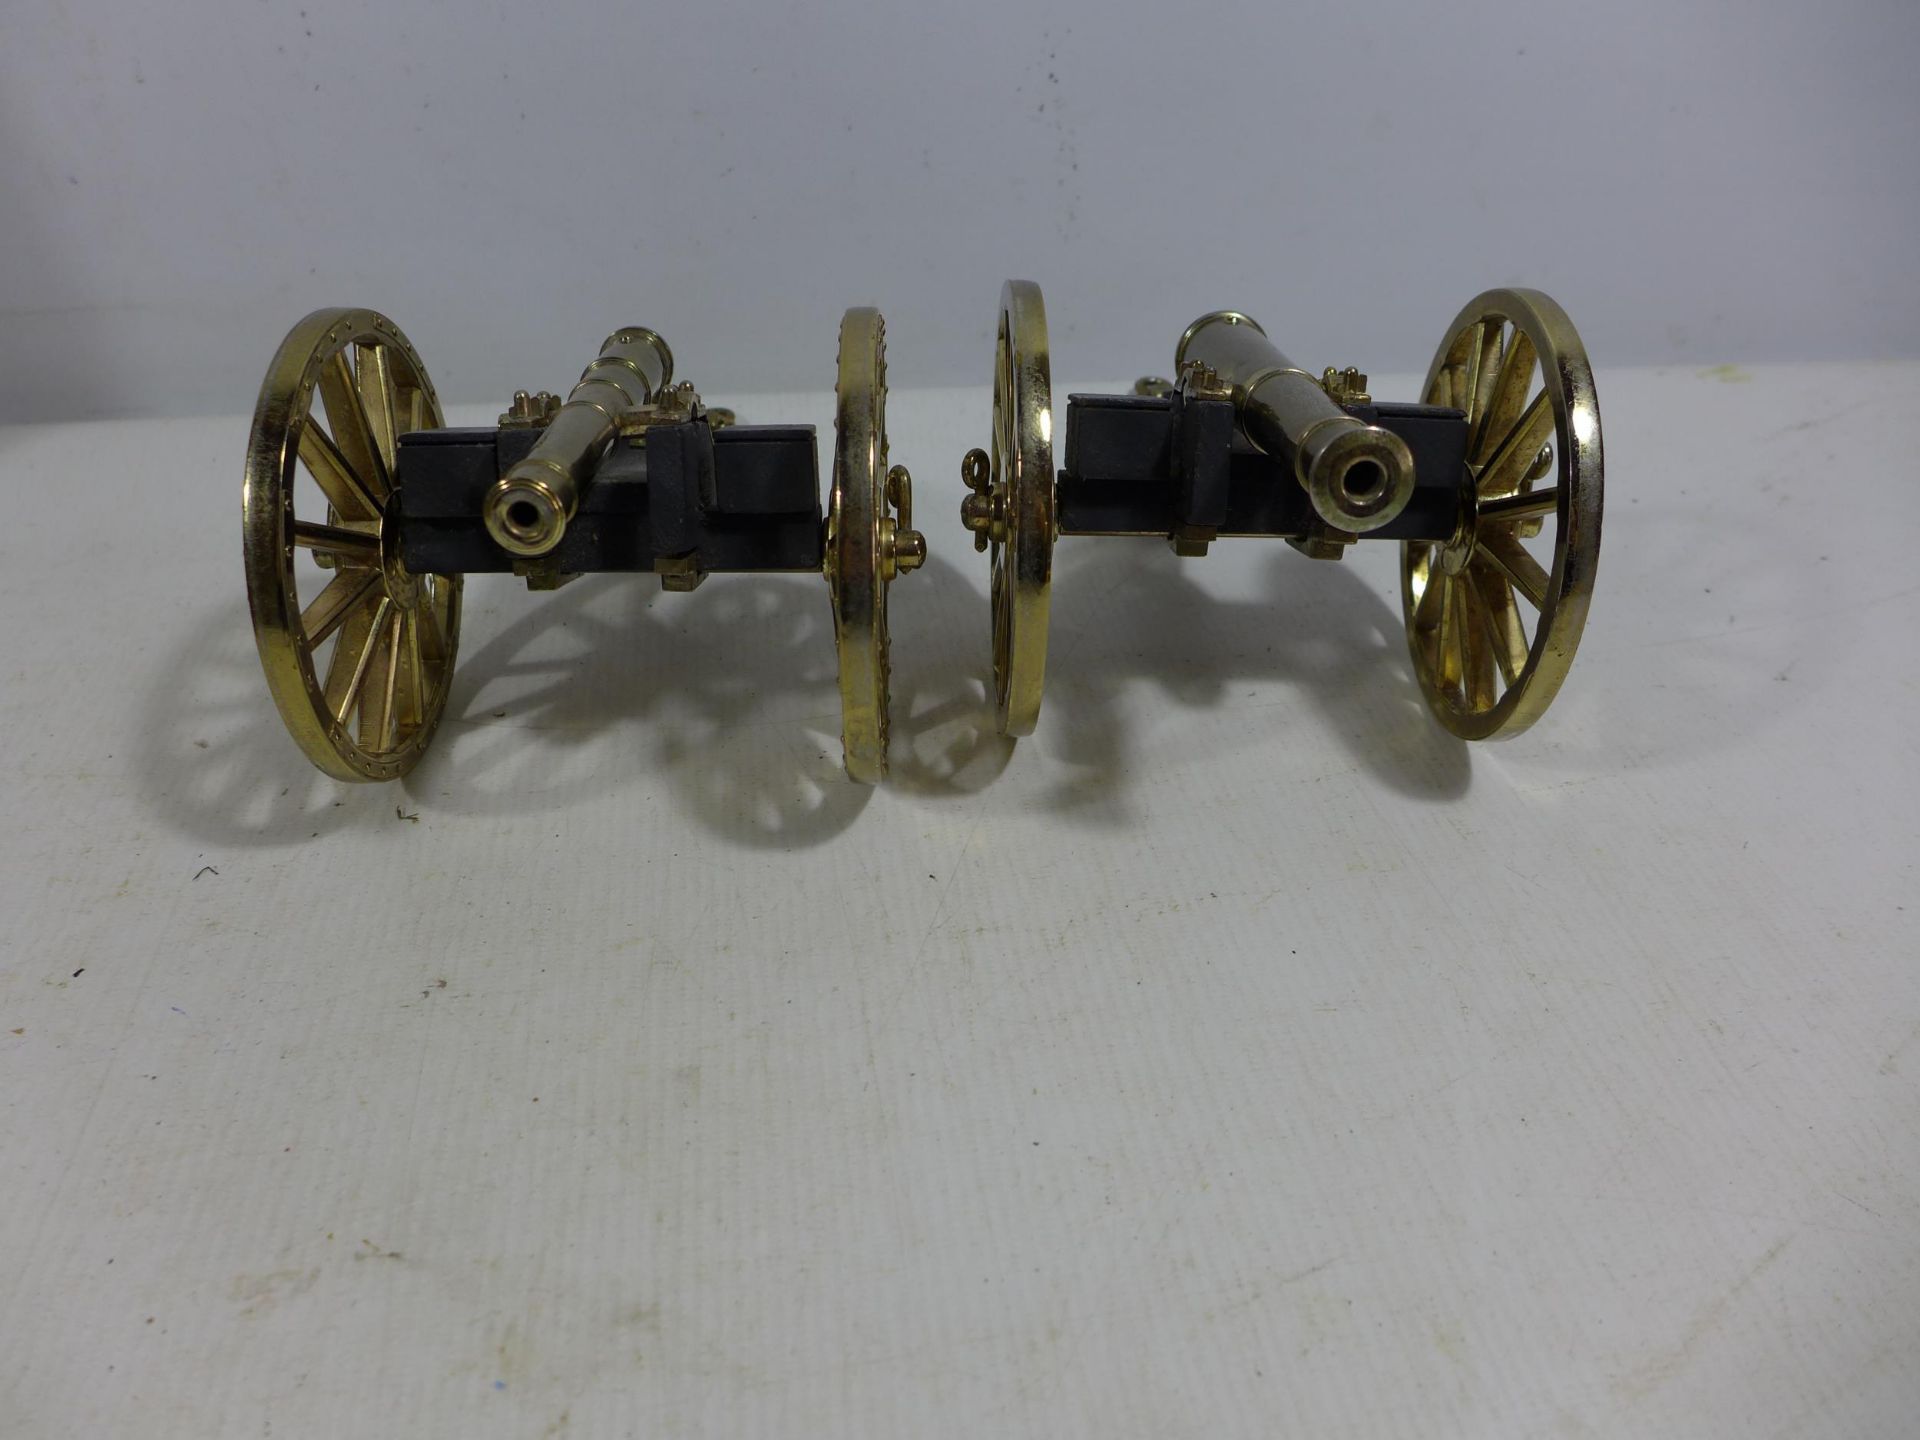 TWO NON FIRING MODEL FIELD CANNONS, 12CM BARRELS, LENGTH 20CM - Image 2 of 3